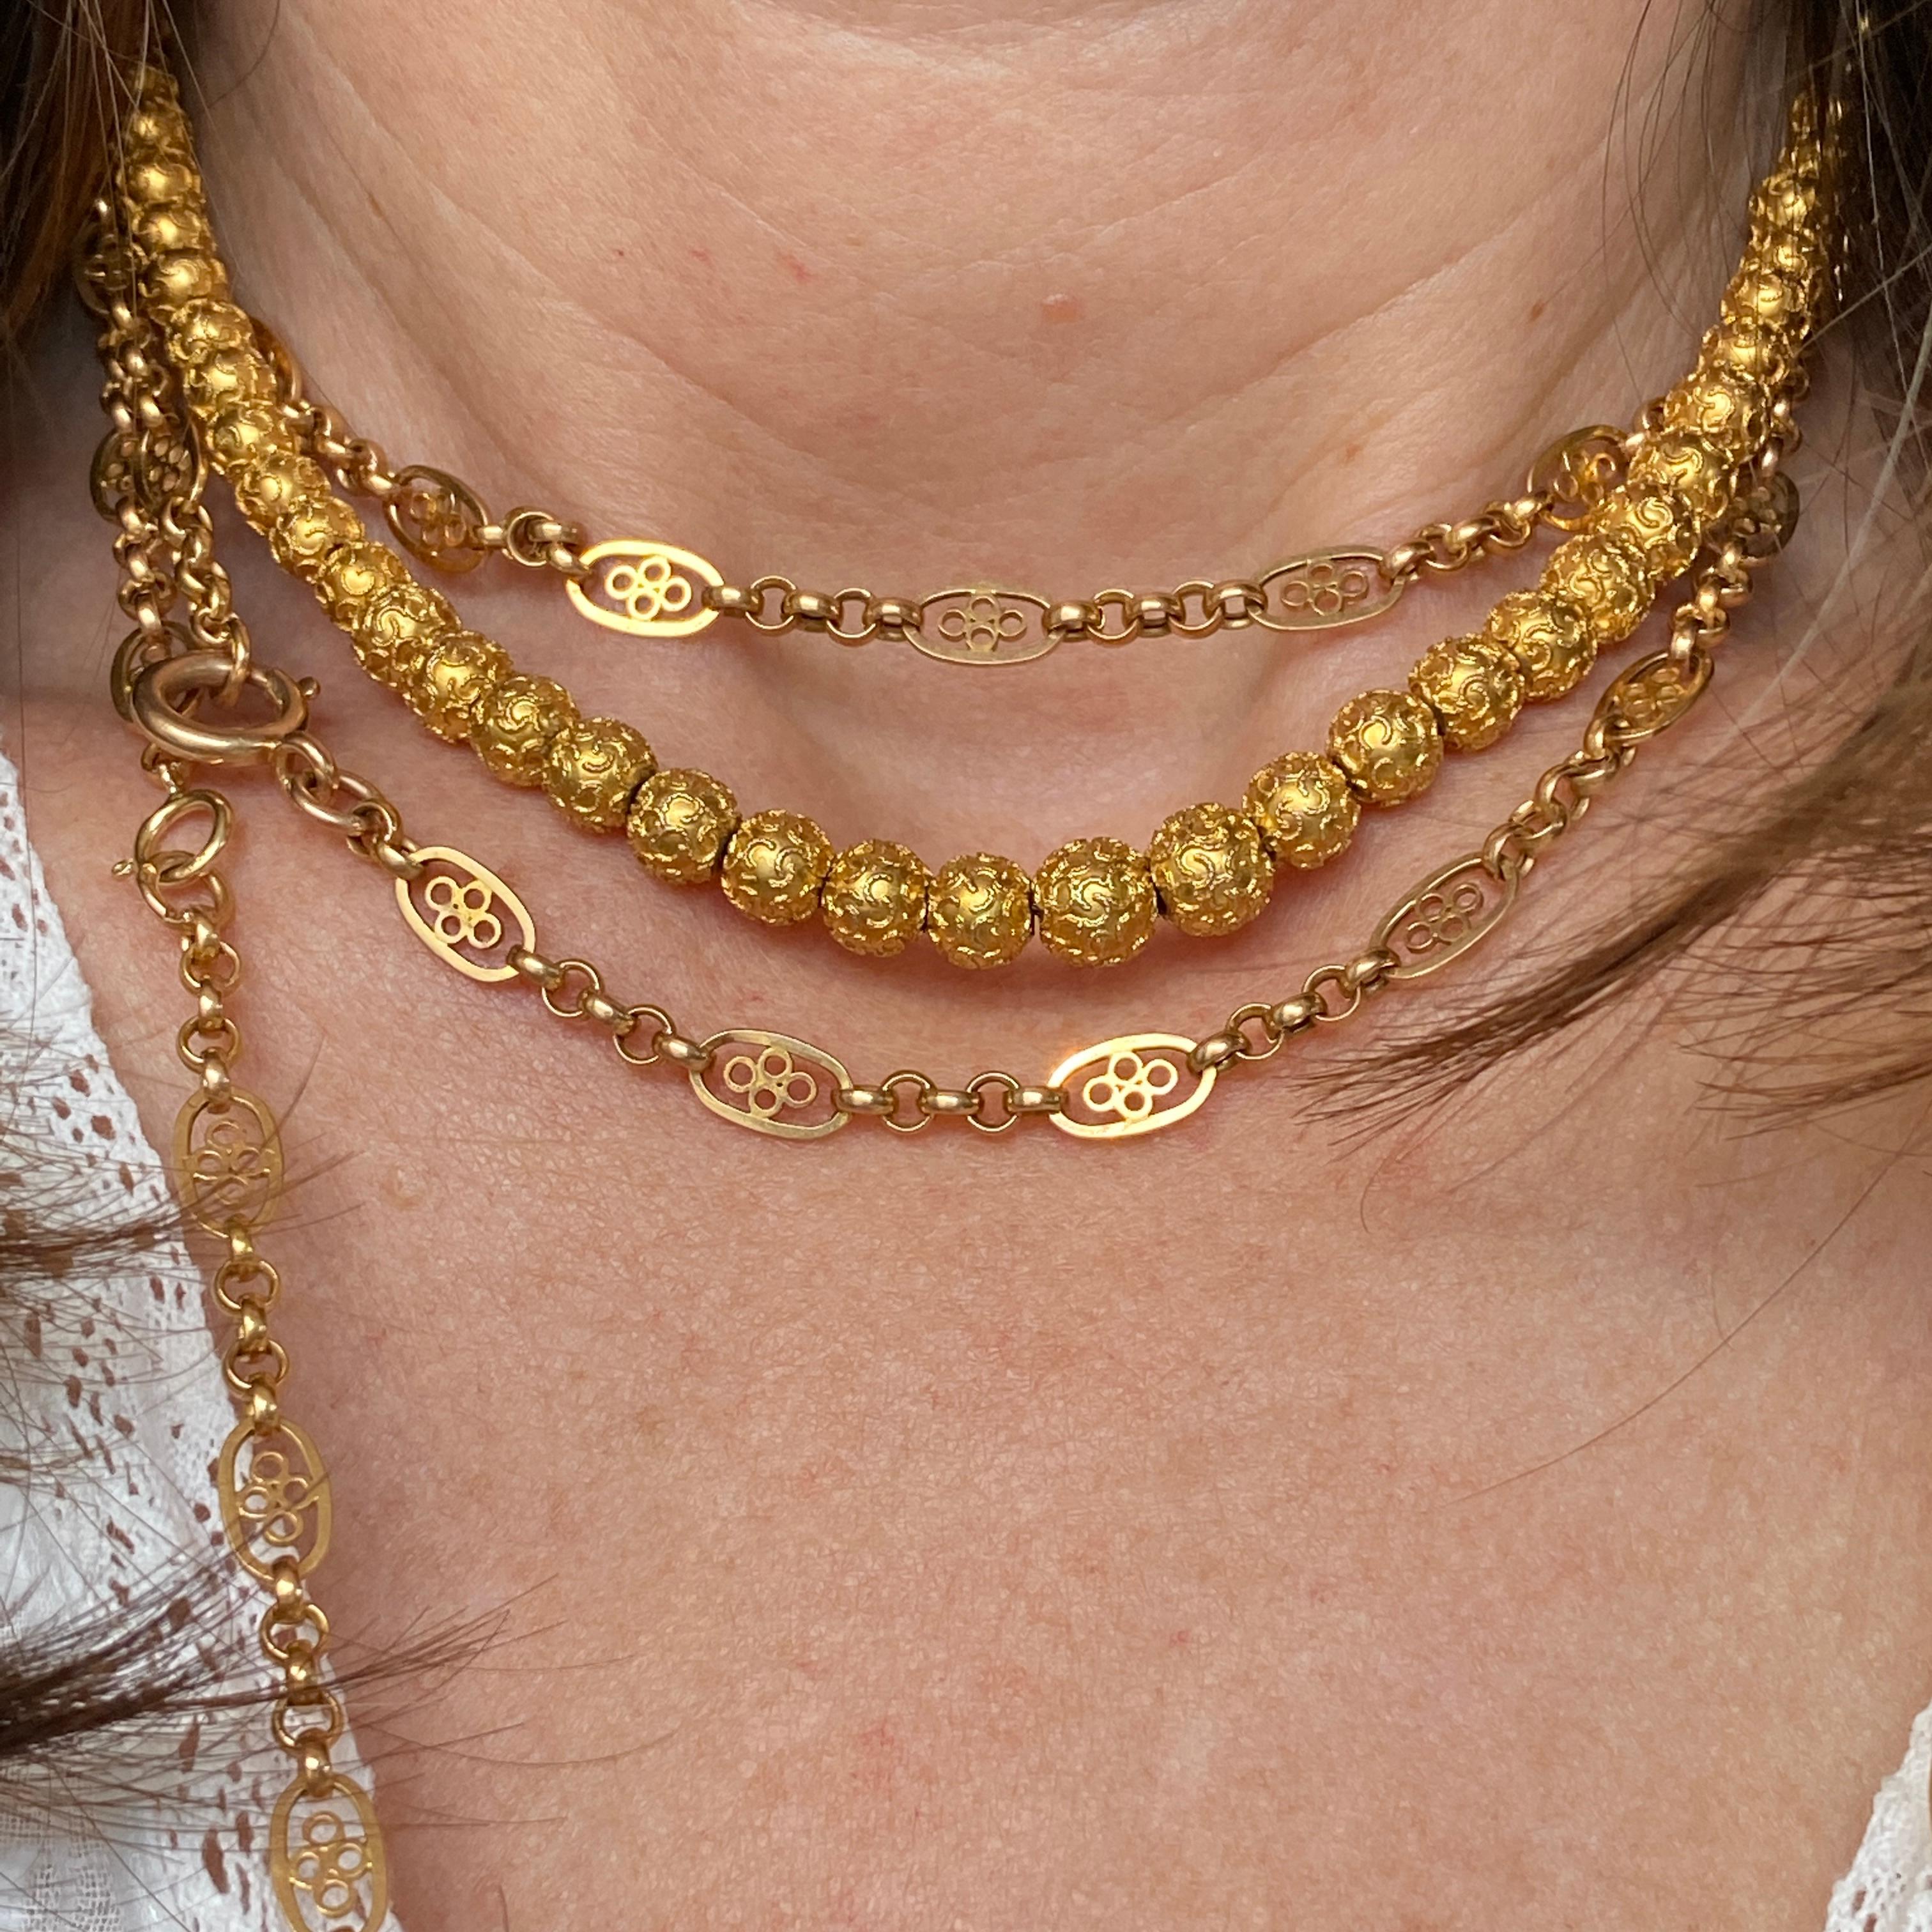 RARE Victorian Etruscan 18/14K Choker Beads Necklace For Sale 2